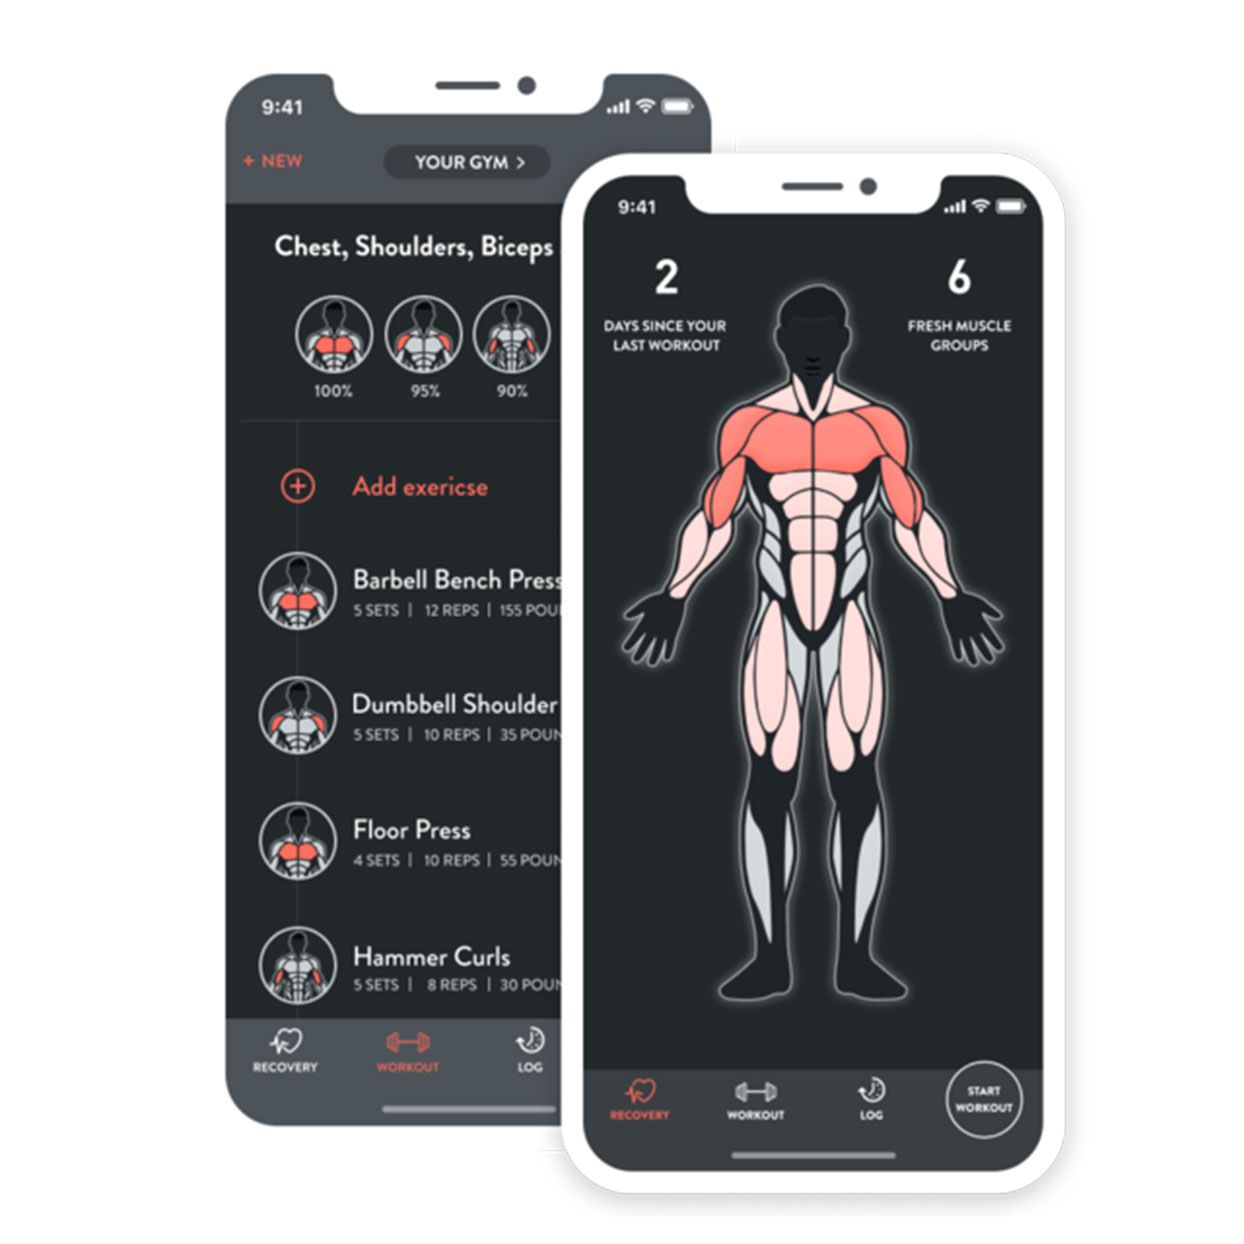 26 Top Pictures Best Weight Lifting App 2020 - 56 Best Workout Apps 2021 Free Exercise Apps To Try